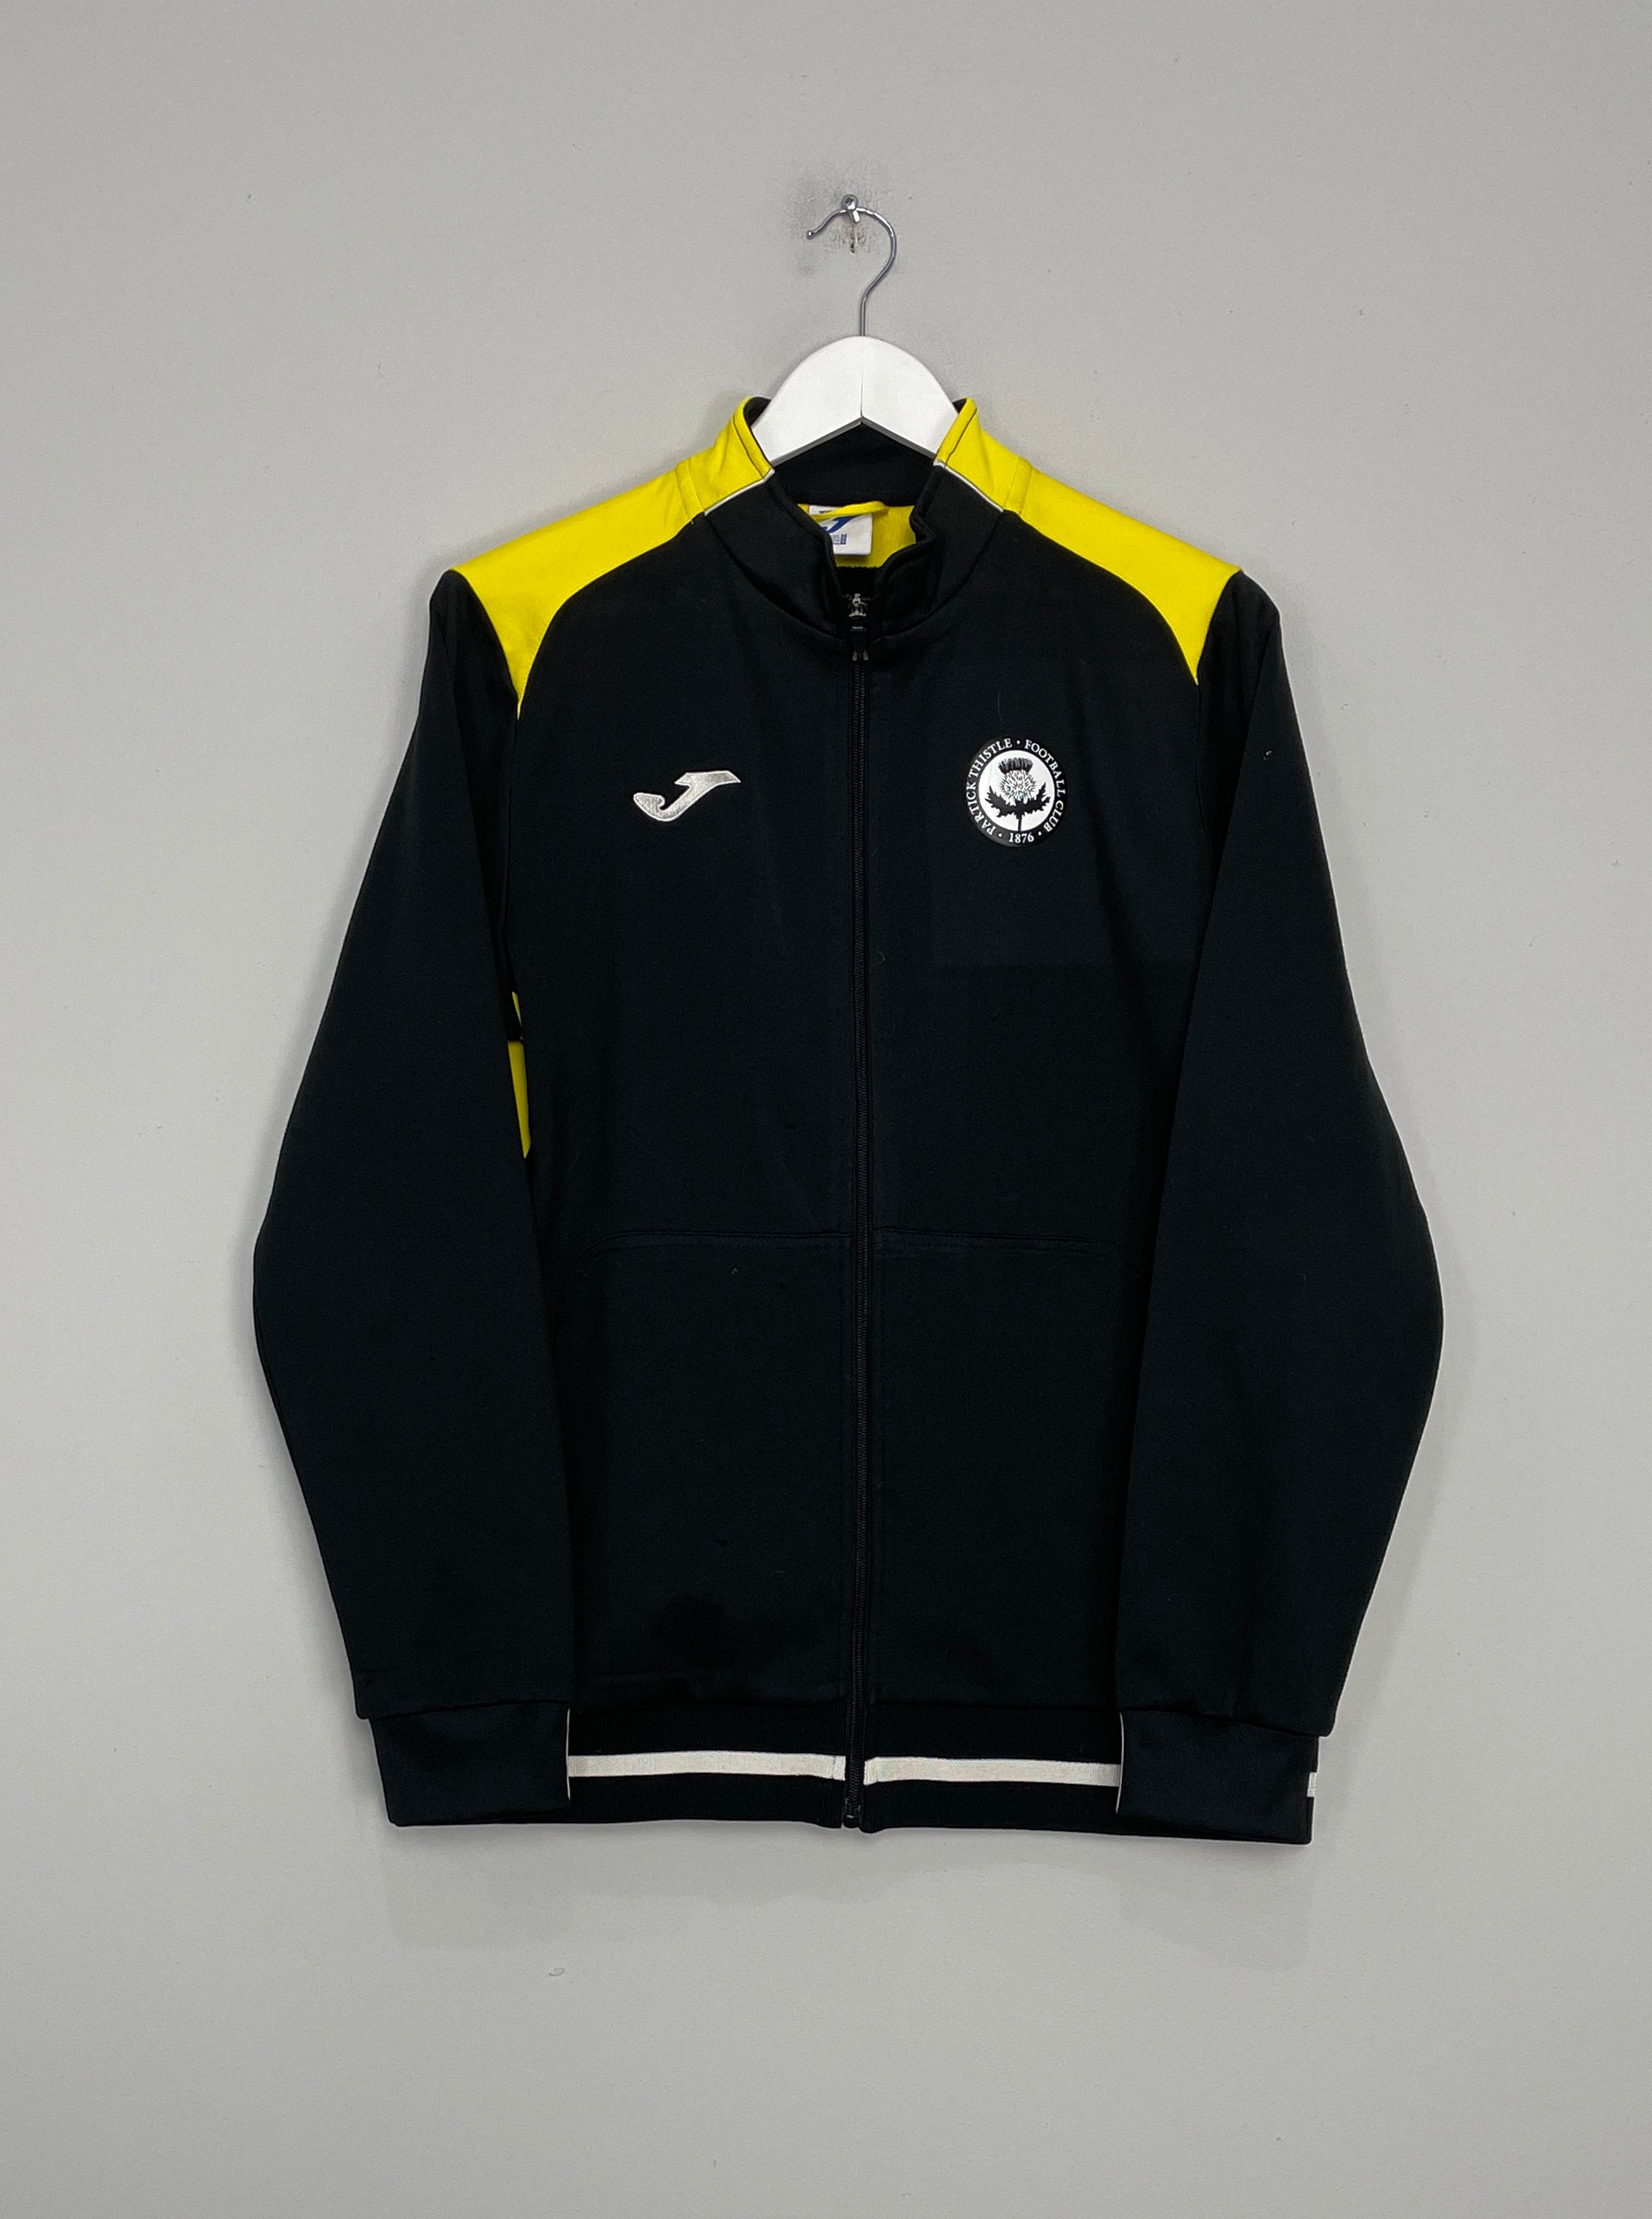 2018/19 PARTICK THISTLE TRACKSUIT TOP (M) JOMA